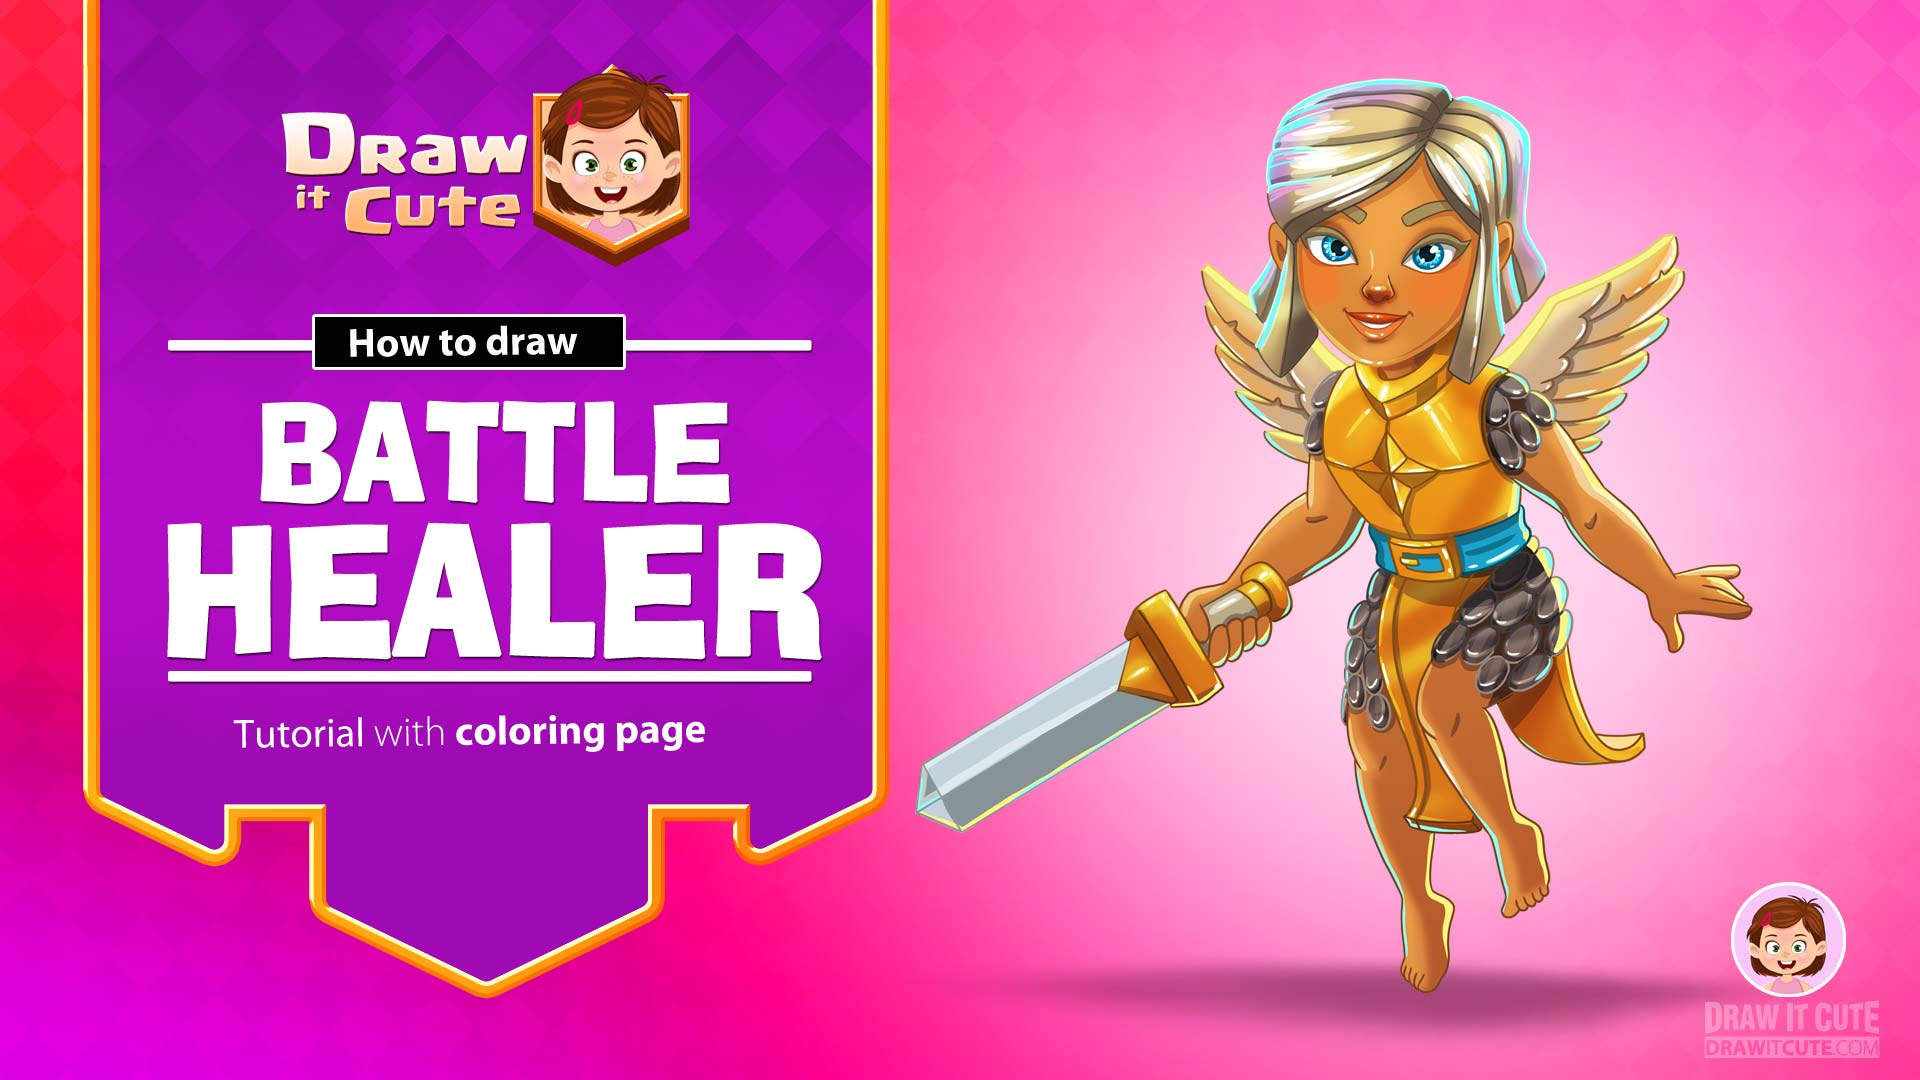 Battle Healer. Clash Royale super easy drawing tutorial with coloring page it cute